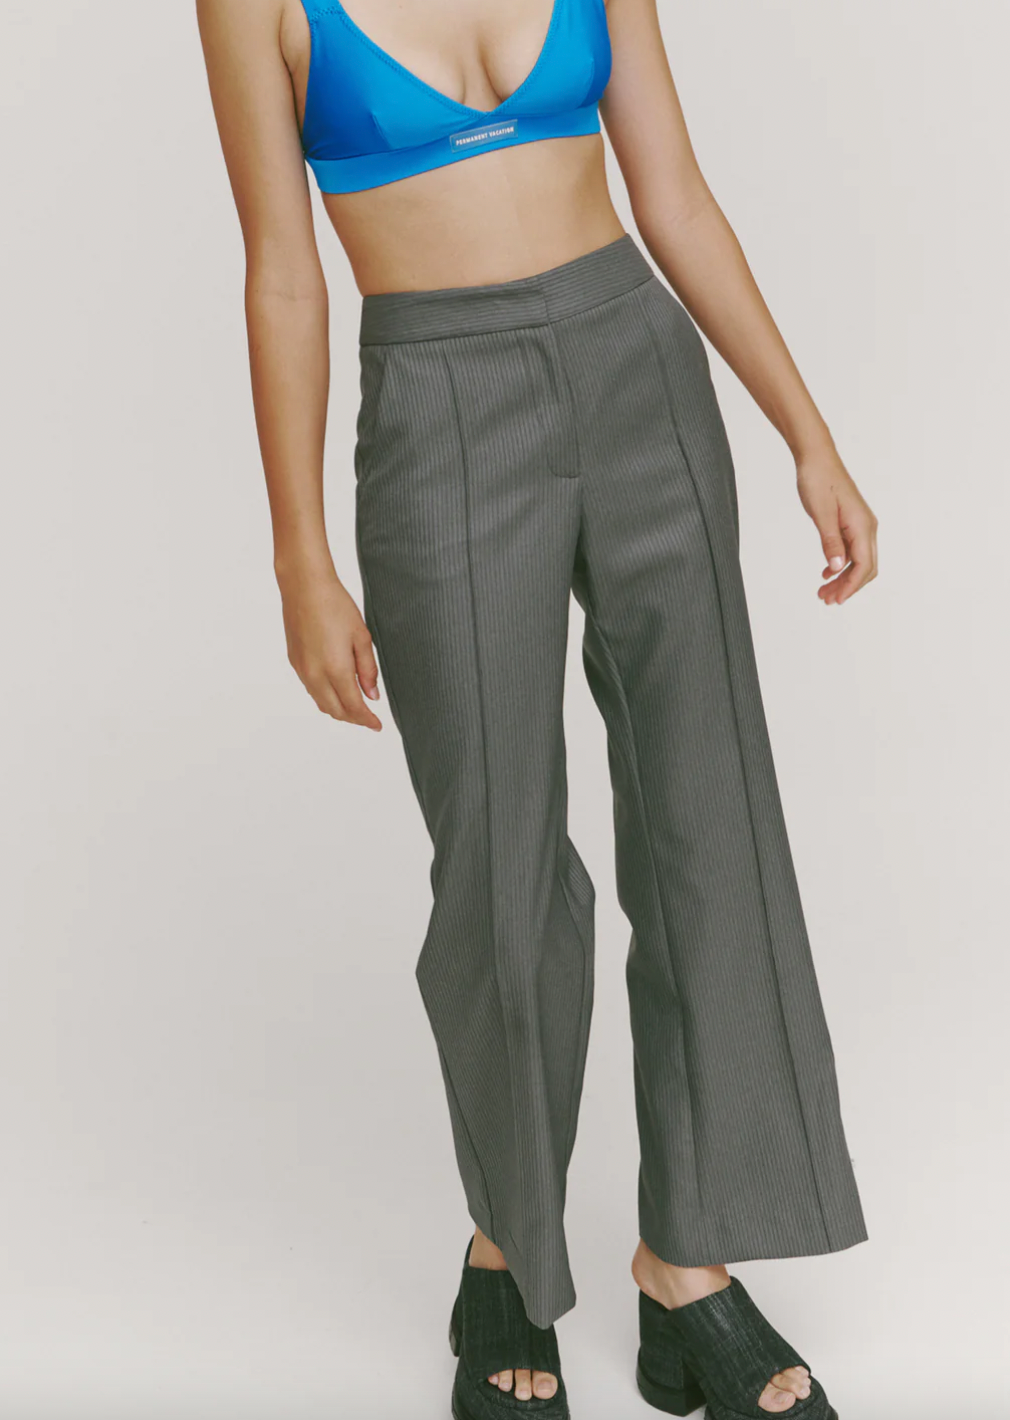 Product Image for All-Day Flares, Grey Pinstripe